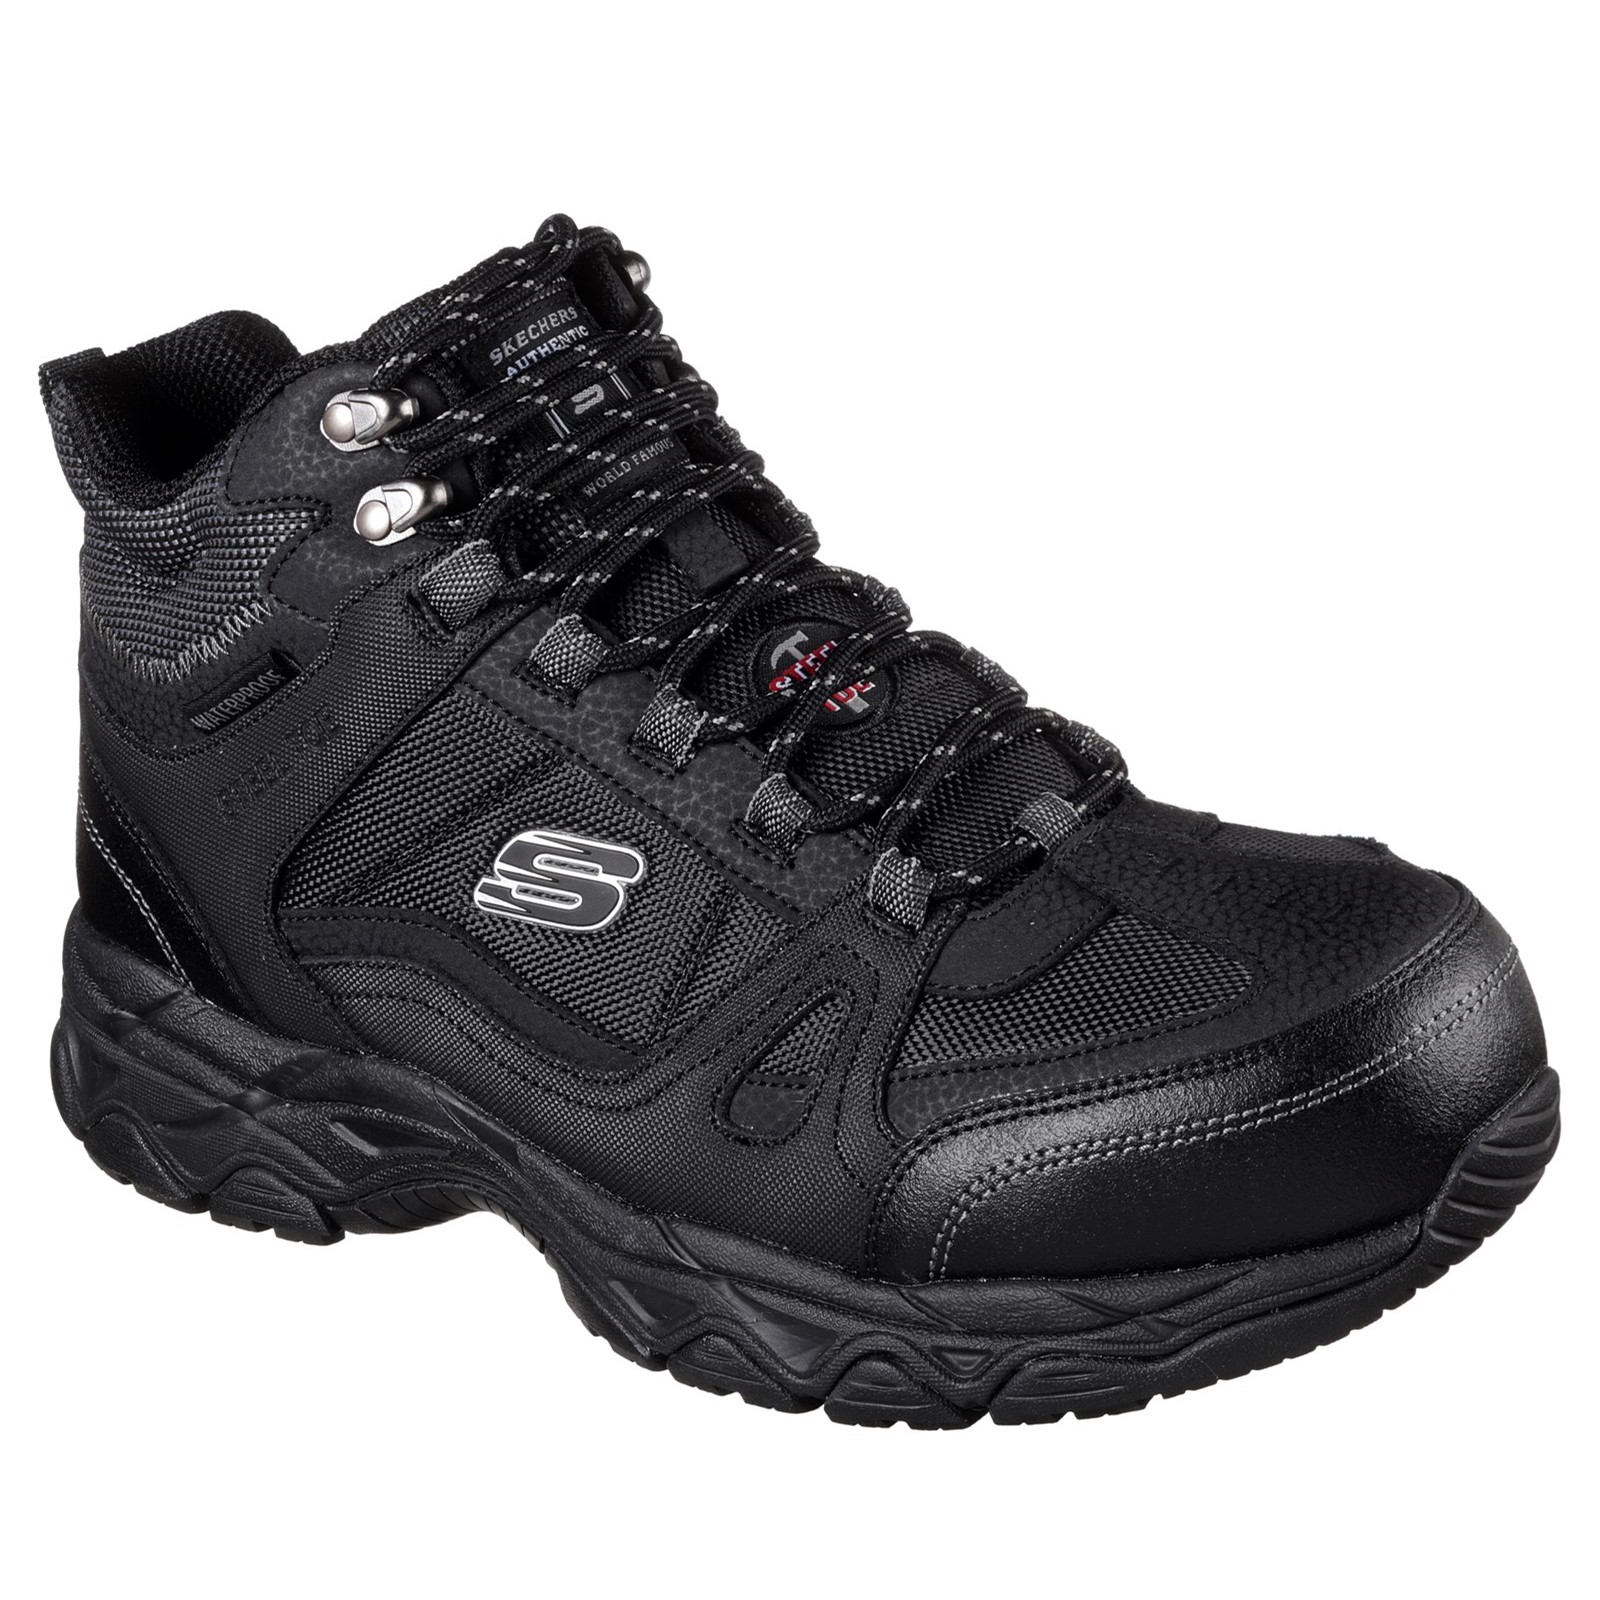 Ledom Safety Boot